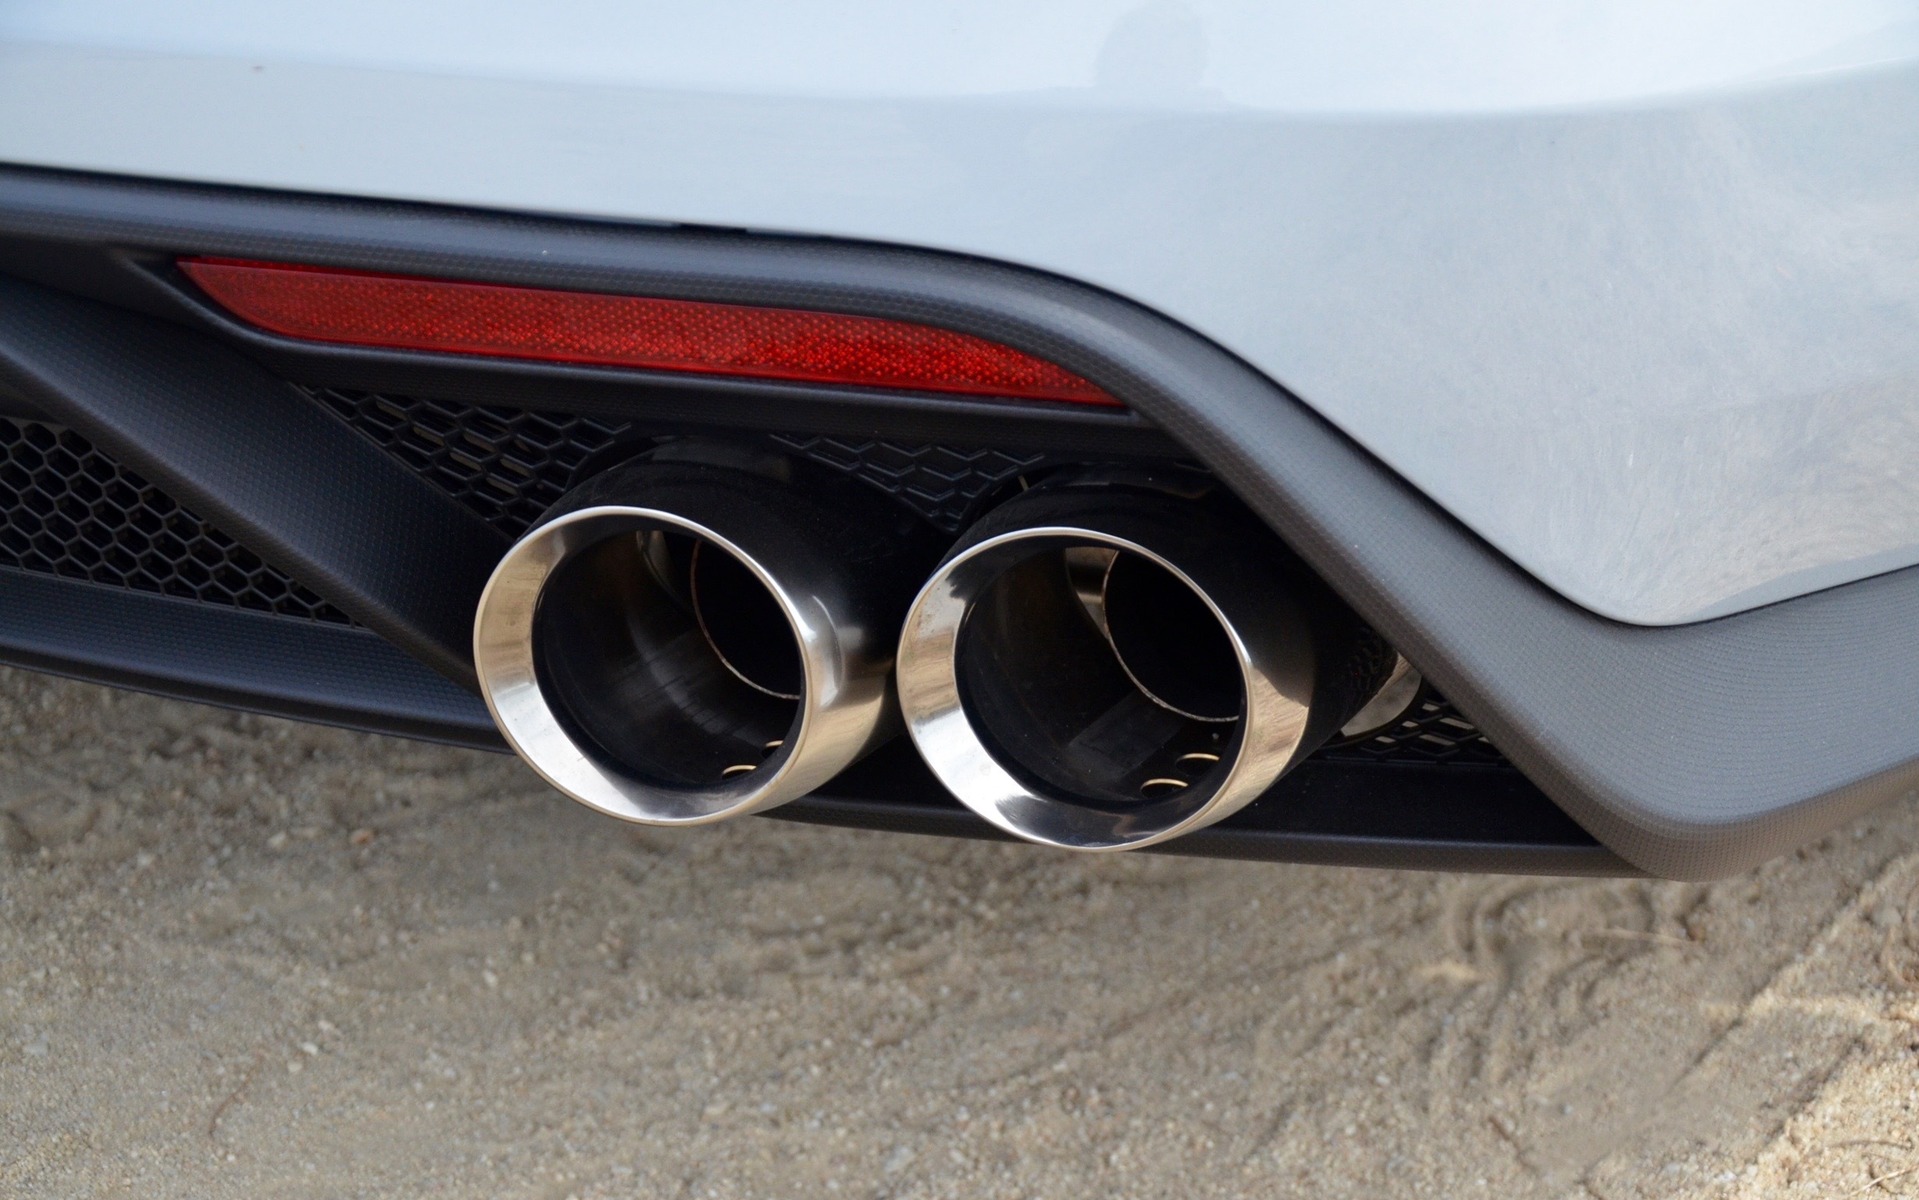 2016 Ford Mustang Shelby GT350 - The exhaust, with no resonators.